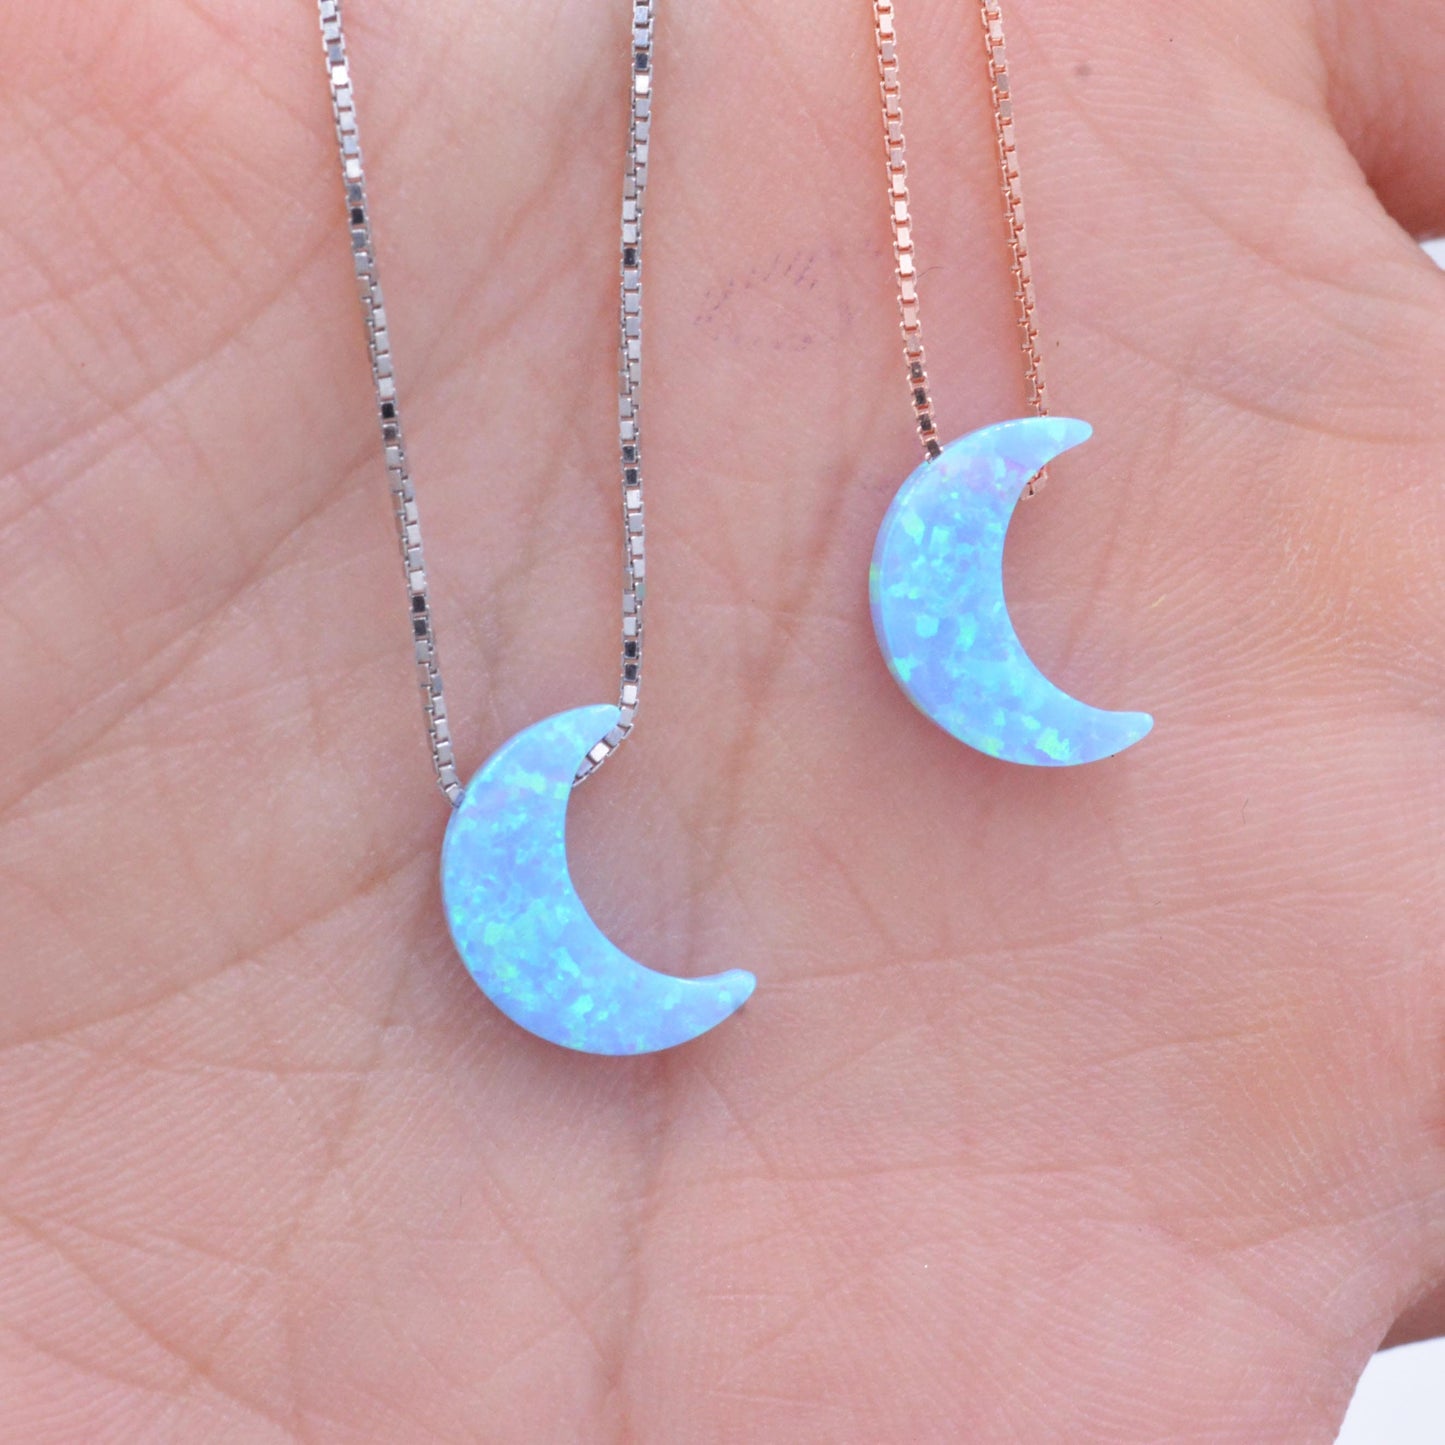 Opal Moon Pendant. Delicate Sterling Silver Necklace. Blue Opal or White Opal. Gold Plated or Rose Gold Plated. Celestial Jewellery.